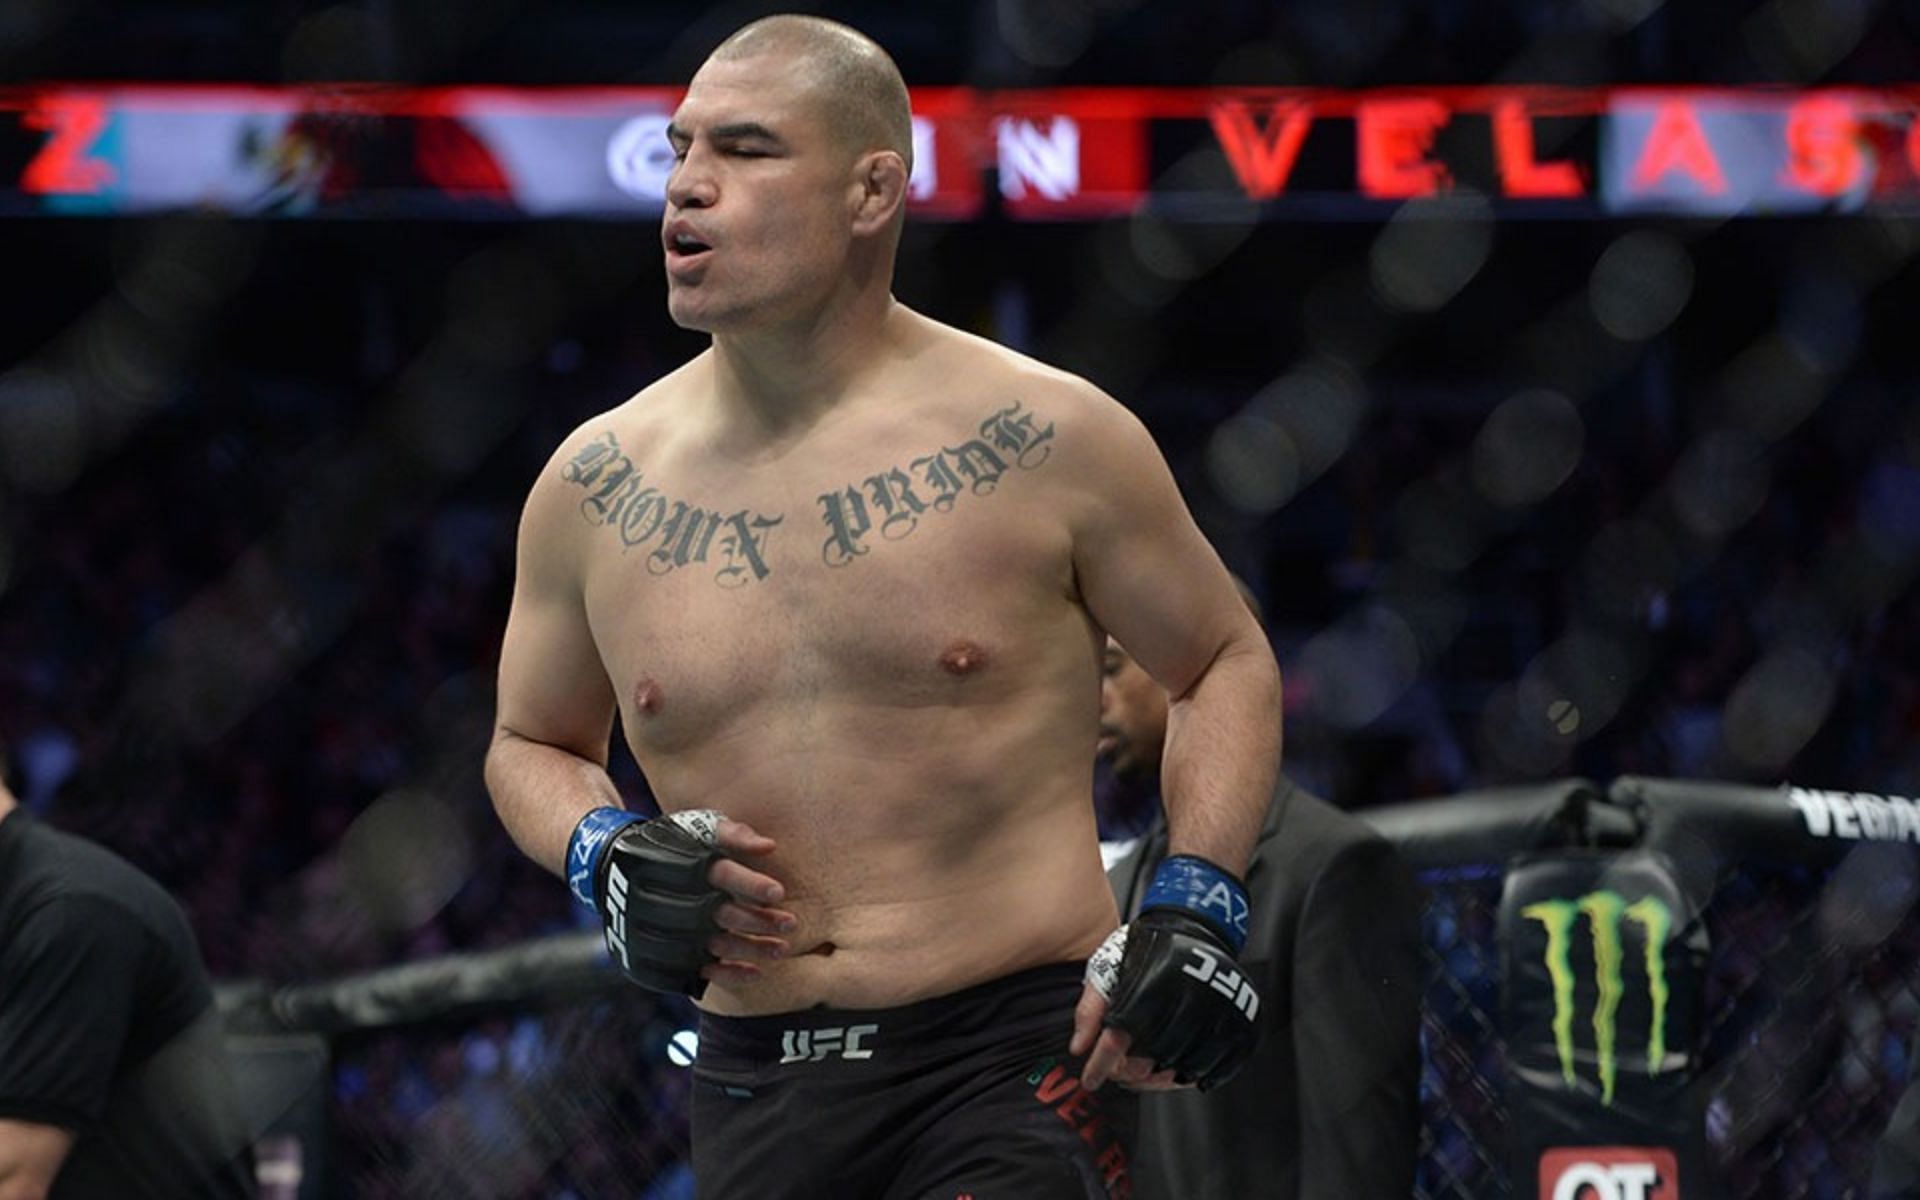 Former UFC heavyweight champion Cain Velasquez&#039; less-than-impressive physique belied his incredible fighting skills